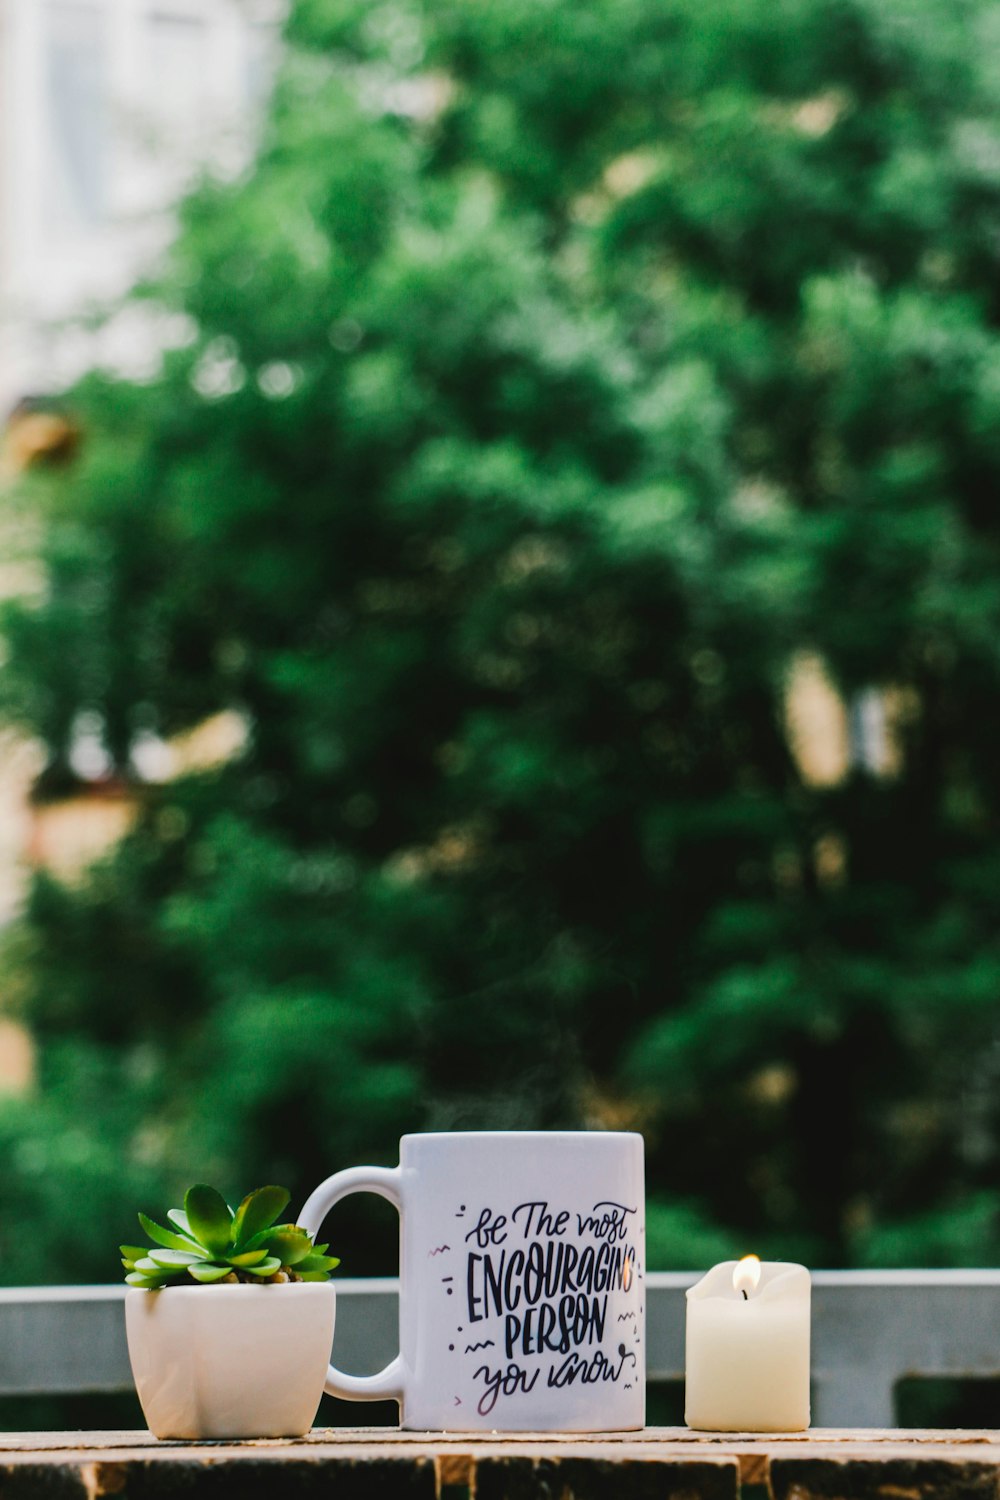 Mugs Pictures | Download Free Images on Unsplash